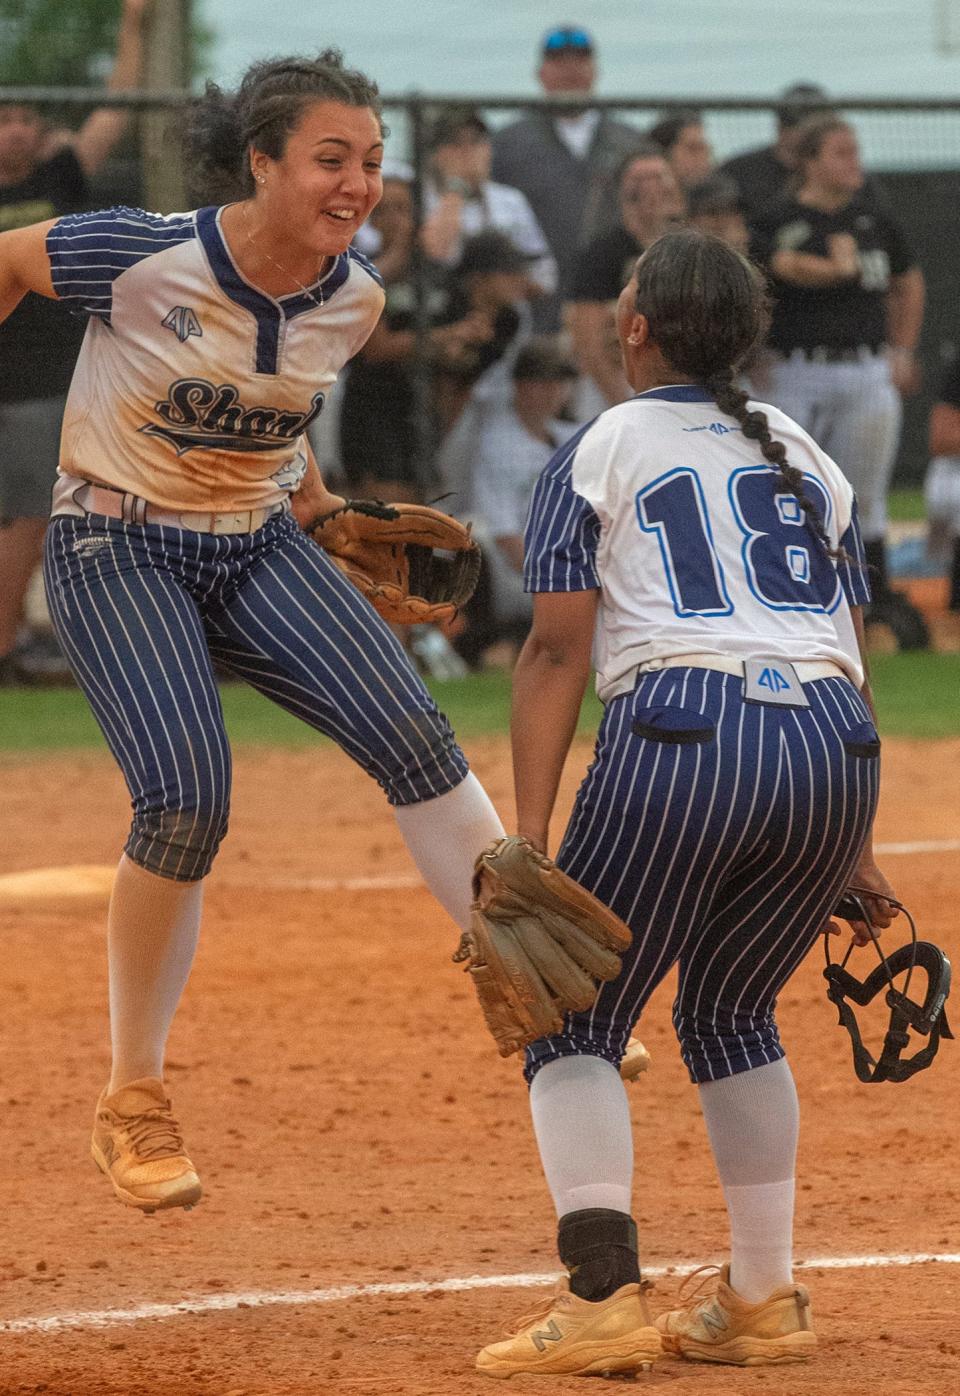 Spanish River High School catcher Isabella Santos (42) and pitcher Giselle Portanova (18) celebrate the team’s win over Lake Brantley High School during their FHSAA State 7A Semi Final softball game at the Legends Way Ball Fields in Clermont Friday. May 26, 2023.